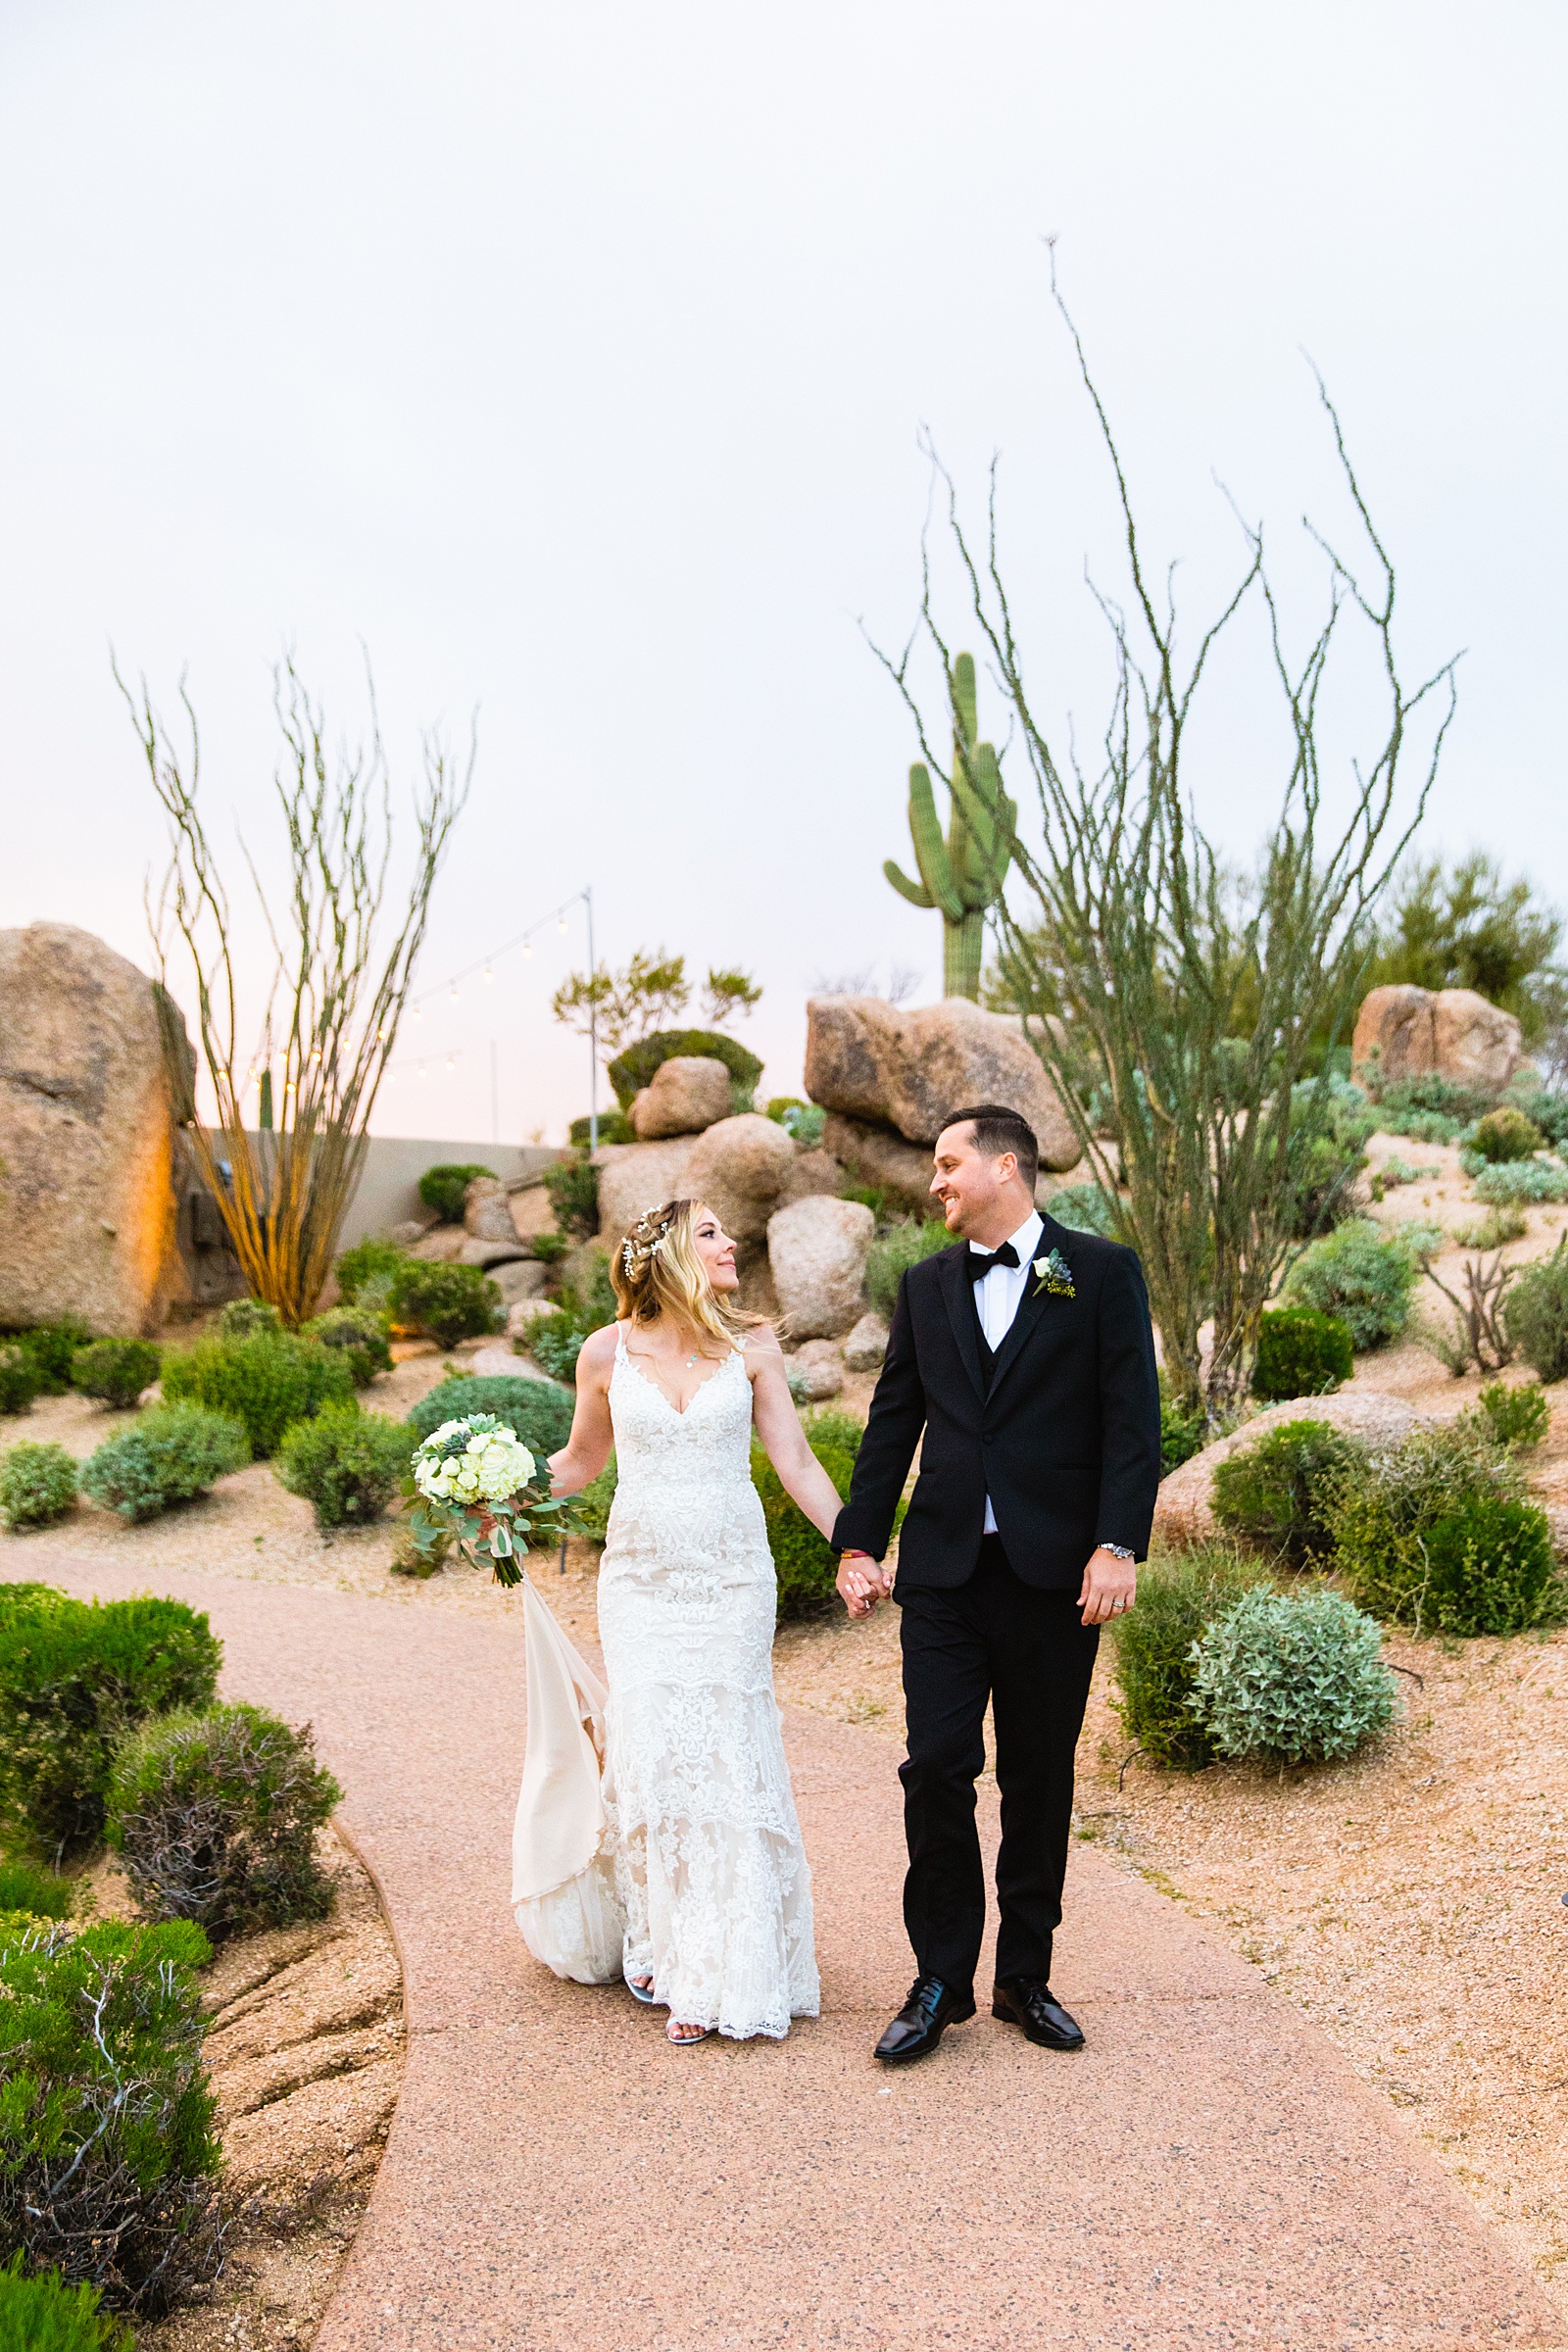 Newlyweds walking together during their Troon North wedding by Scottsdale wedding photographer PMA Photography.